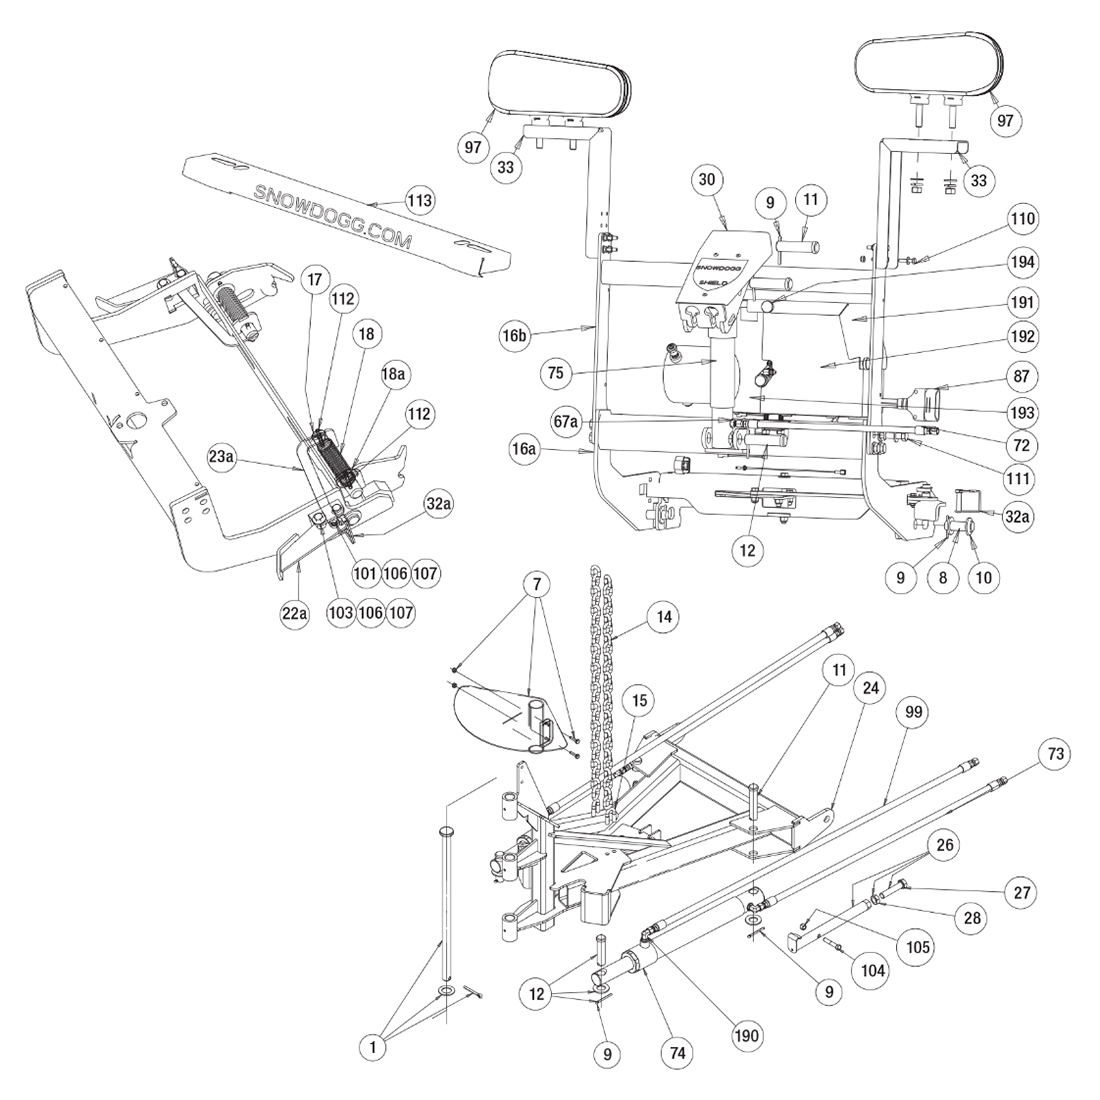 Buyers SnowDogg Discontinued Model VMD75 Lift Frame Diagram